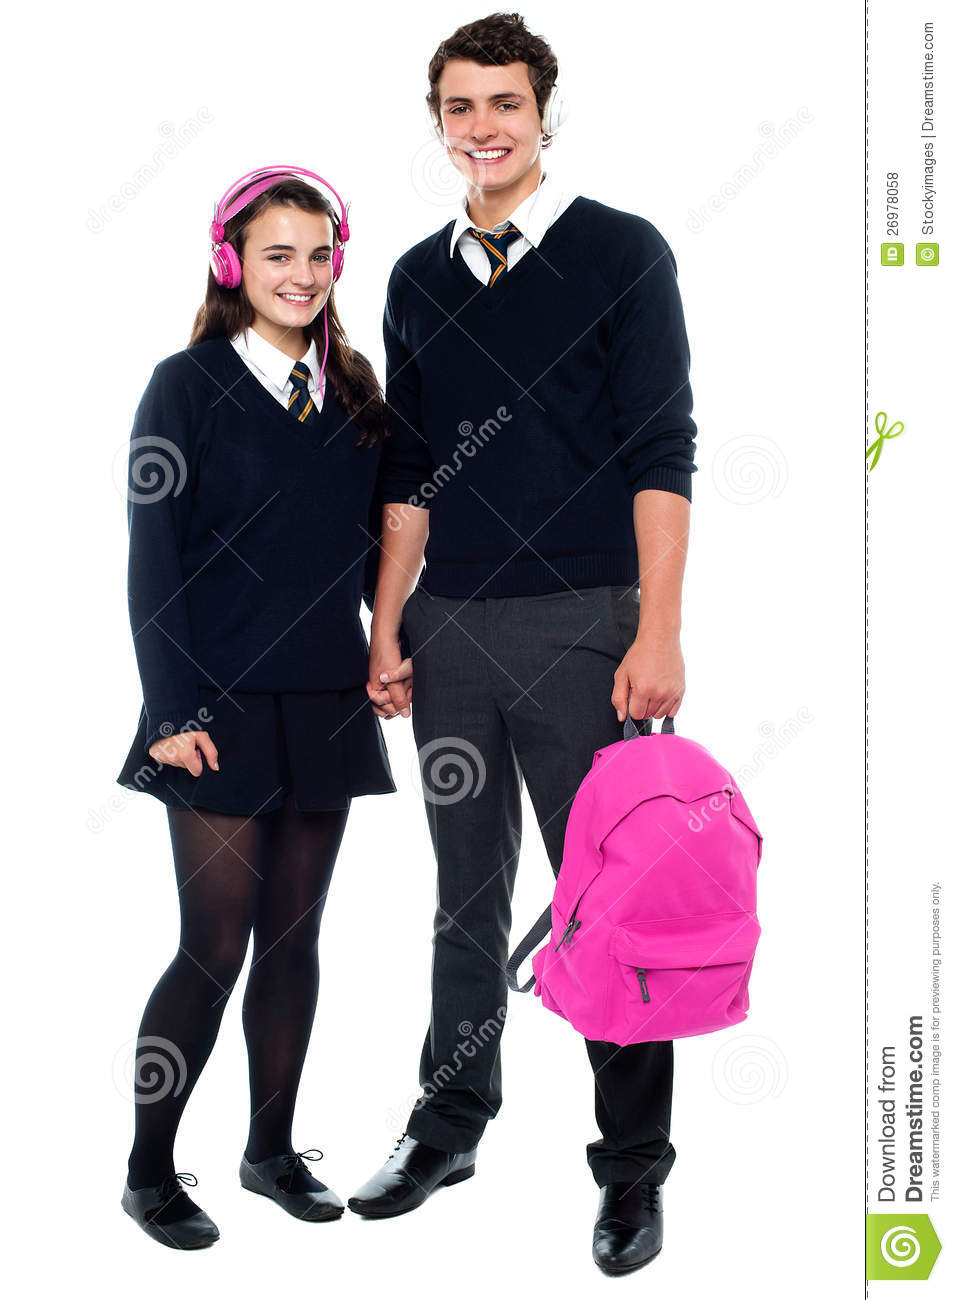     Holding Pink Backpack Posing With Female Student  Full Length Shot